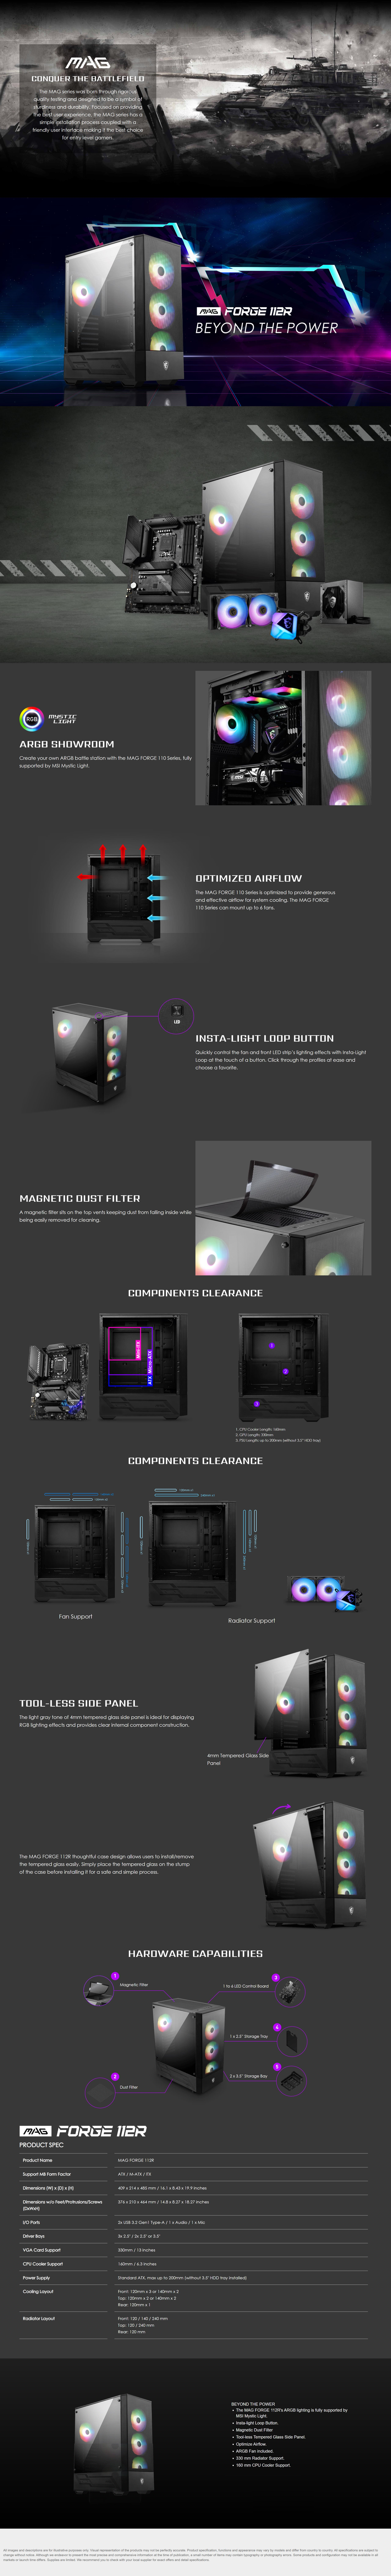 A large marketing image providing additional information about the product MSI MAG Forge 112R Mid Tower Case - Black - Additional alt info not provided